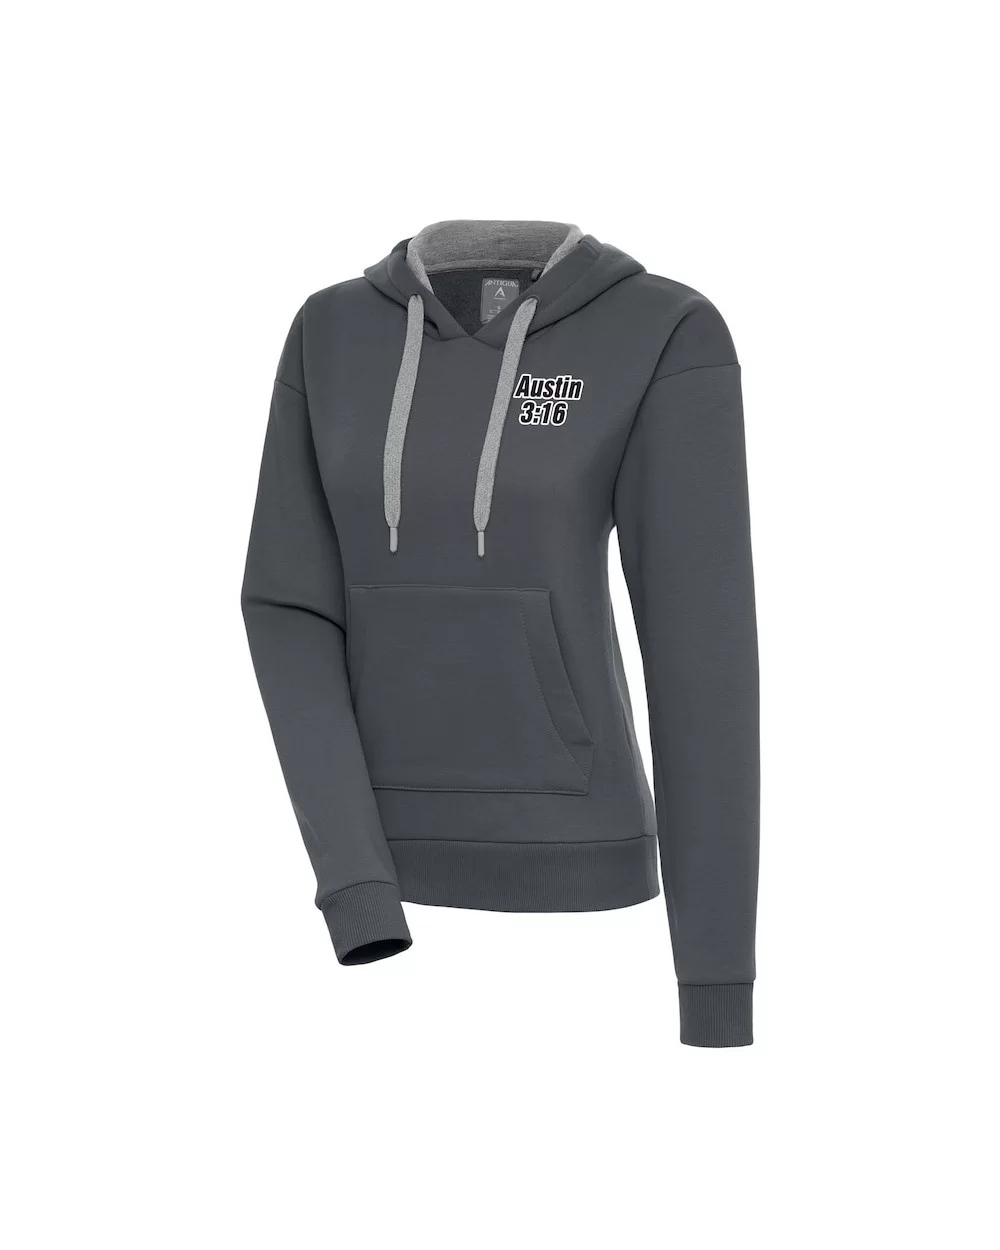 Women's Antigua Charcoal "Stone Cold" Steve Austin Victory Pullover Hoodie $19.80 Apparel